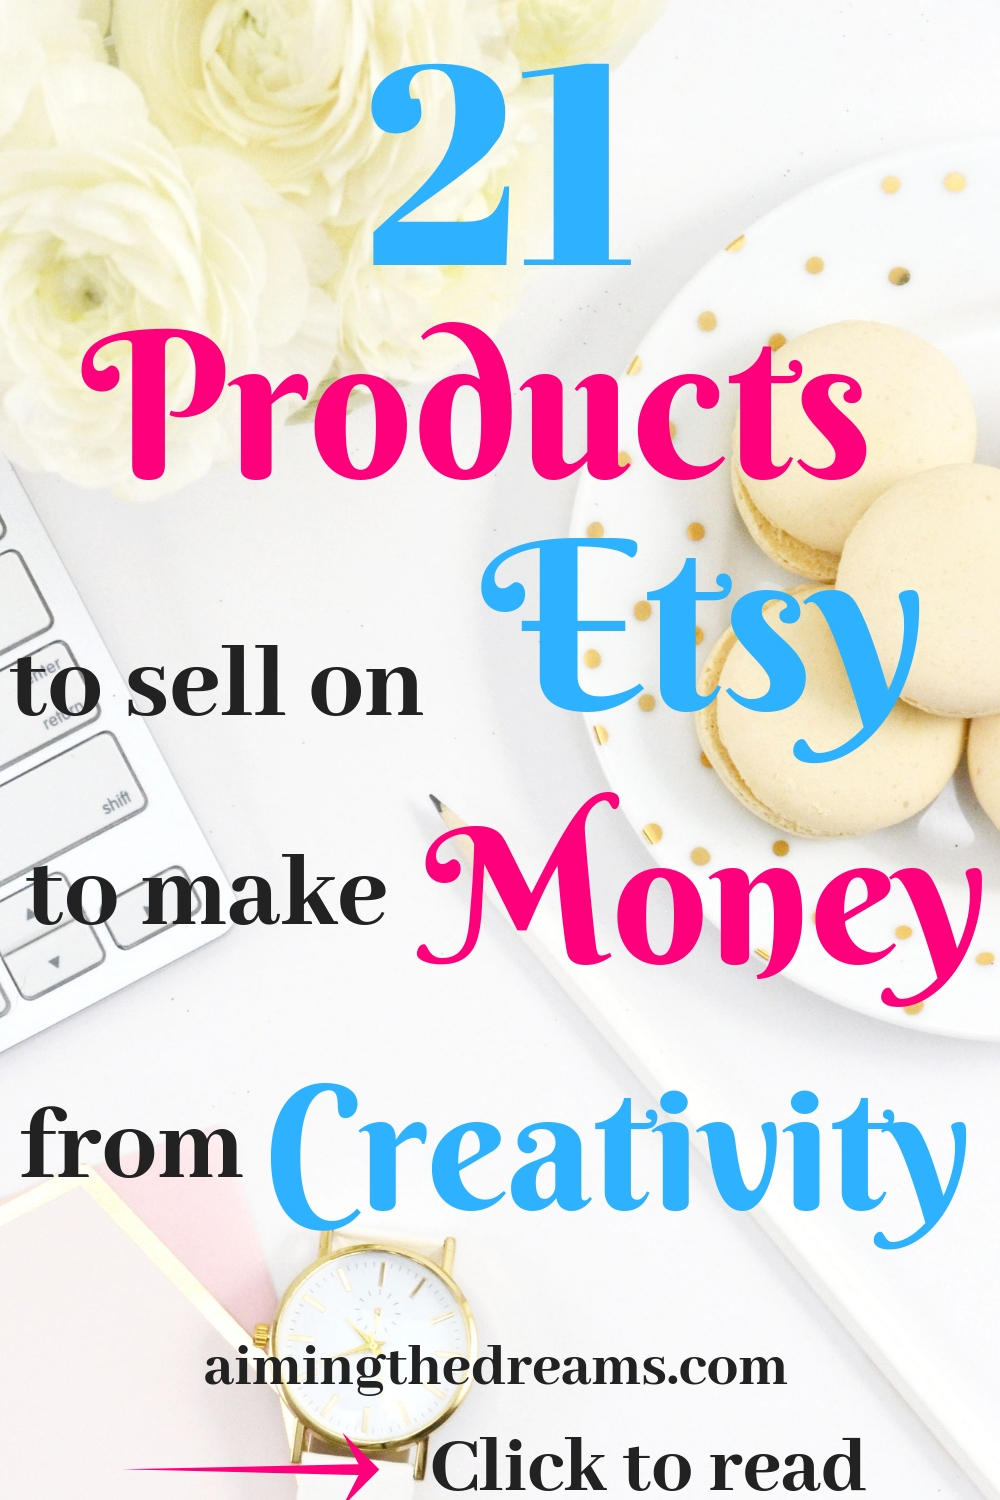 #Etsy #shop #ideas to begin your #creative business on Etsy. Click to read